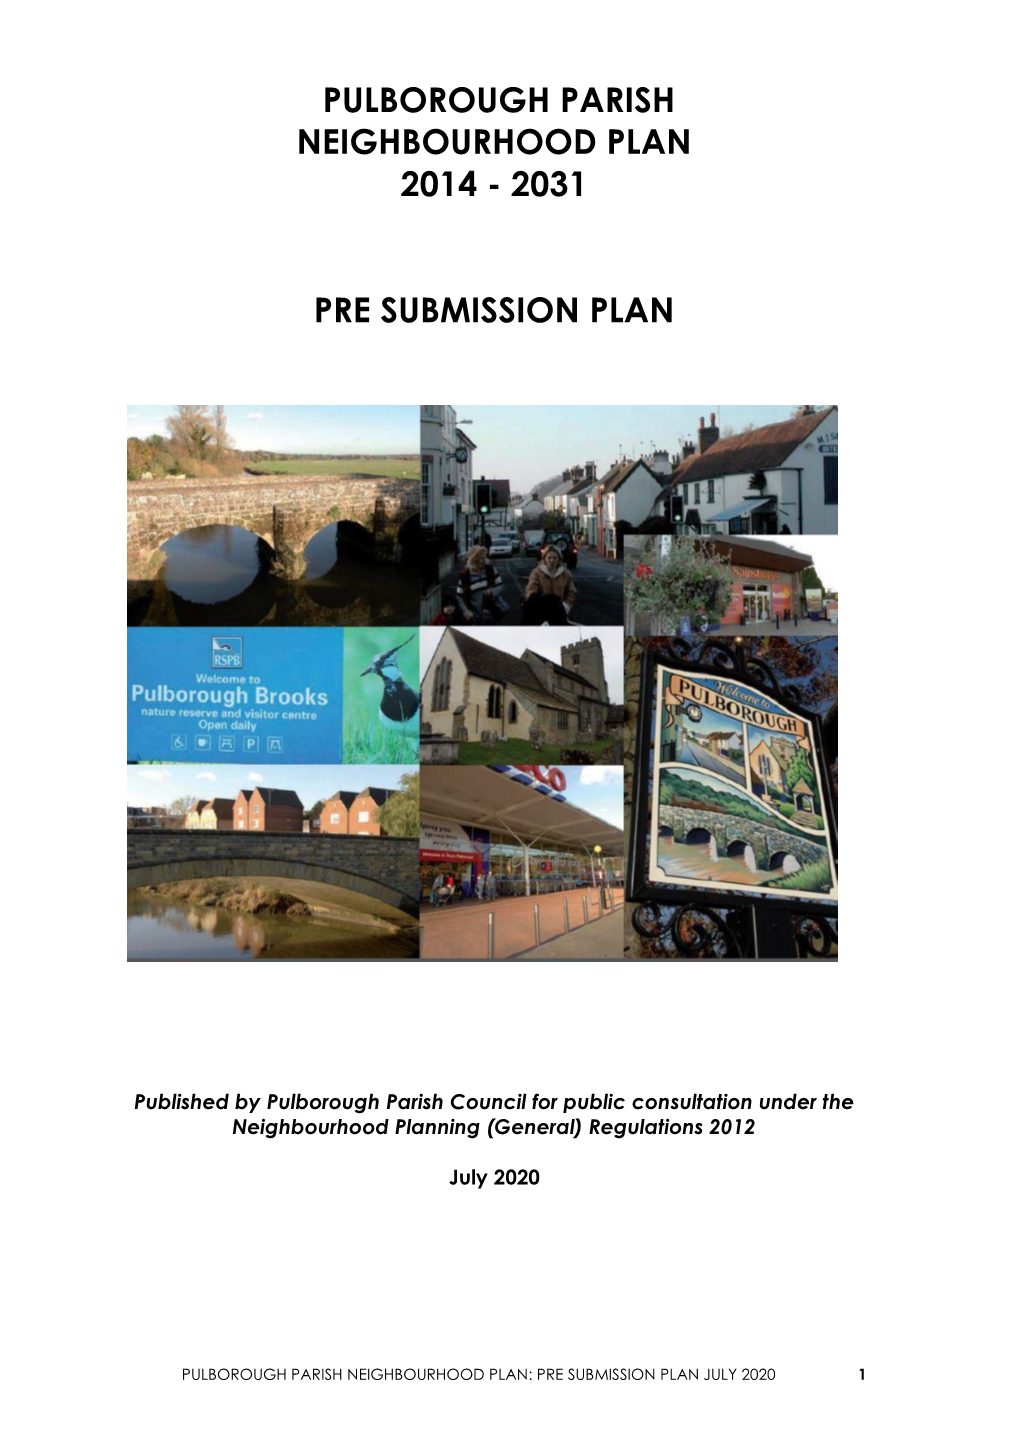 Pre-Submission Plan, Please Do So by Midnight of 31St August 2020 at the Latest